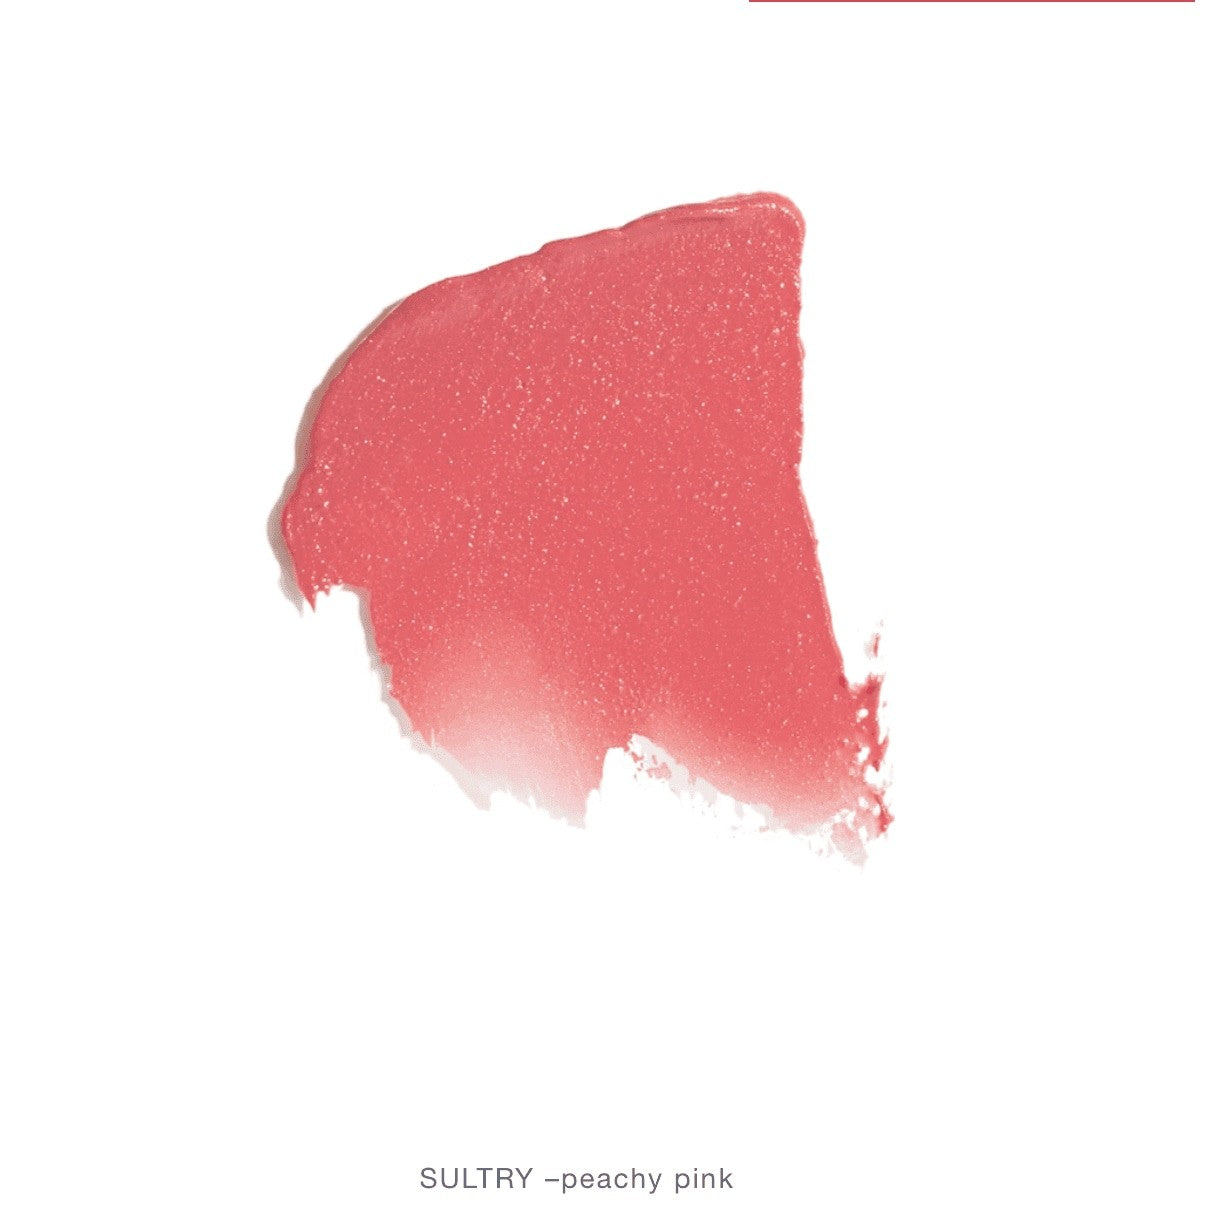 VAPOUR AURA MULTI STICK SULTRY-peachy pink